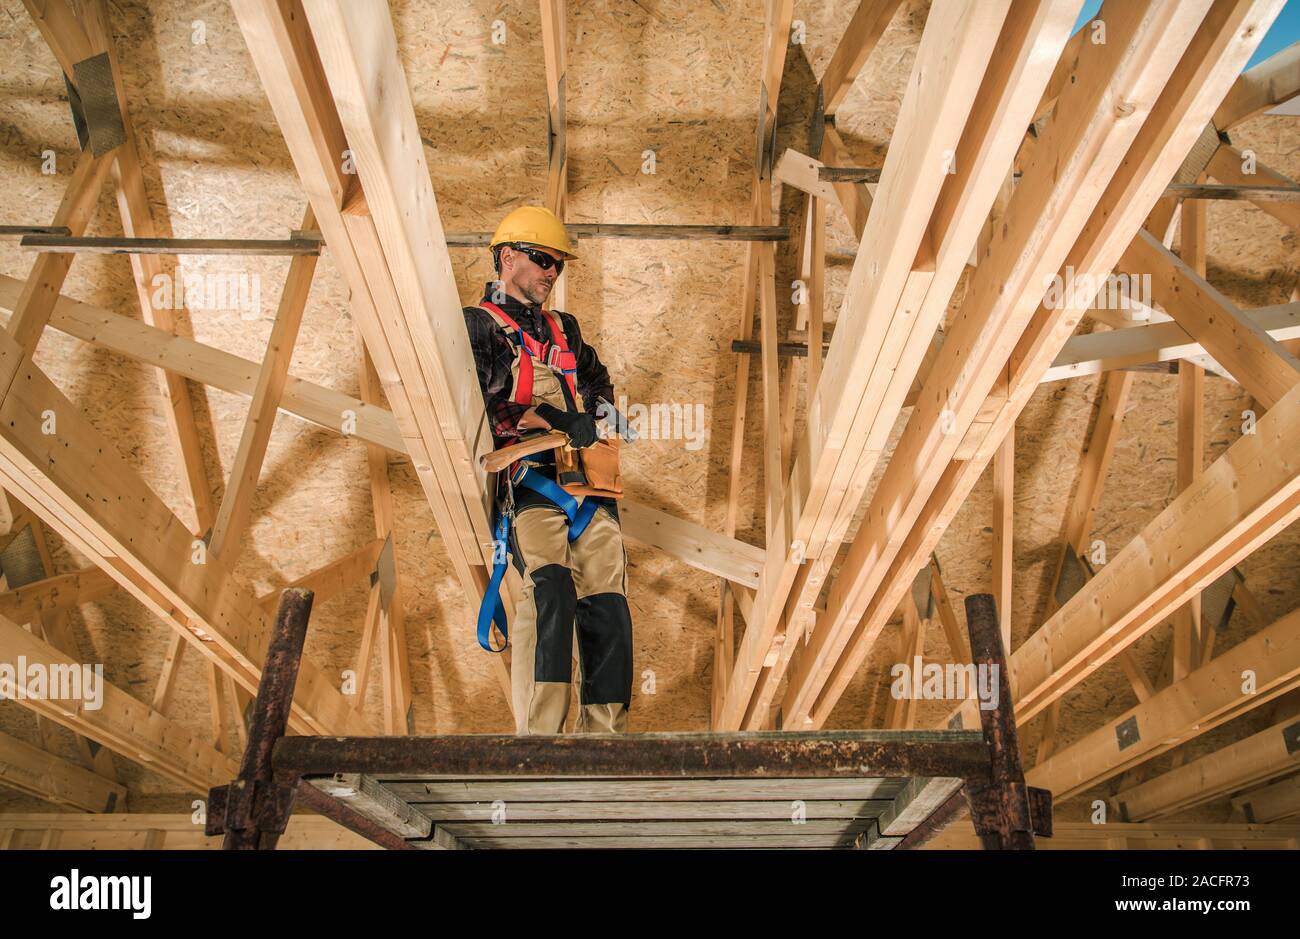 Skeleton Wood Construction of Newly Developed House. Caucasian Construction Contractor Job. Industrial Theme. Stock Photo